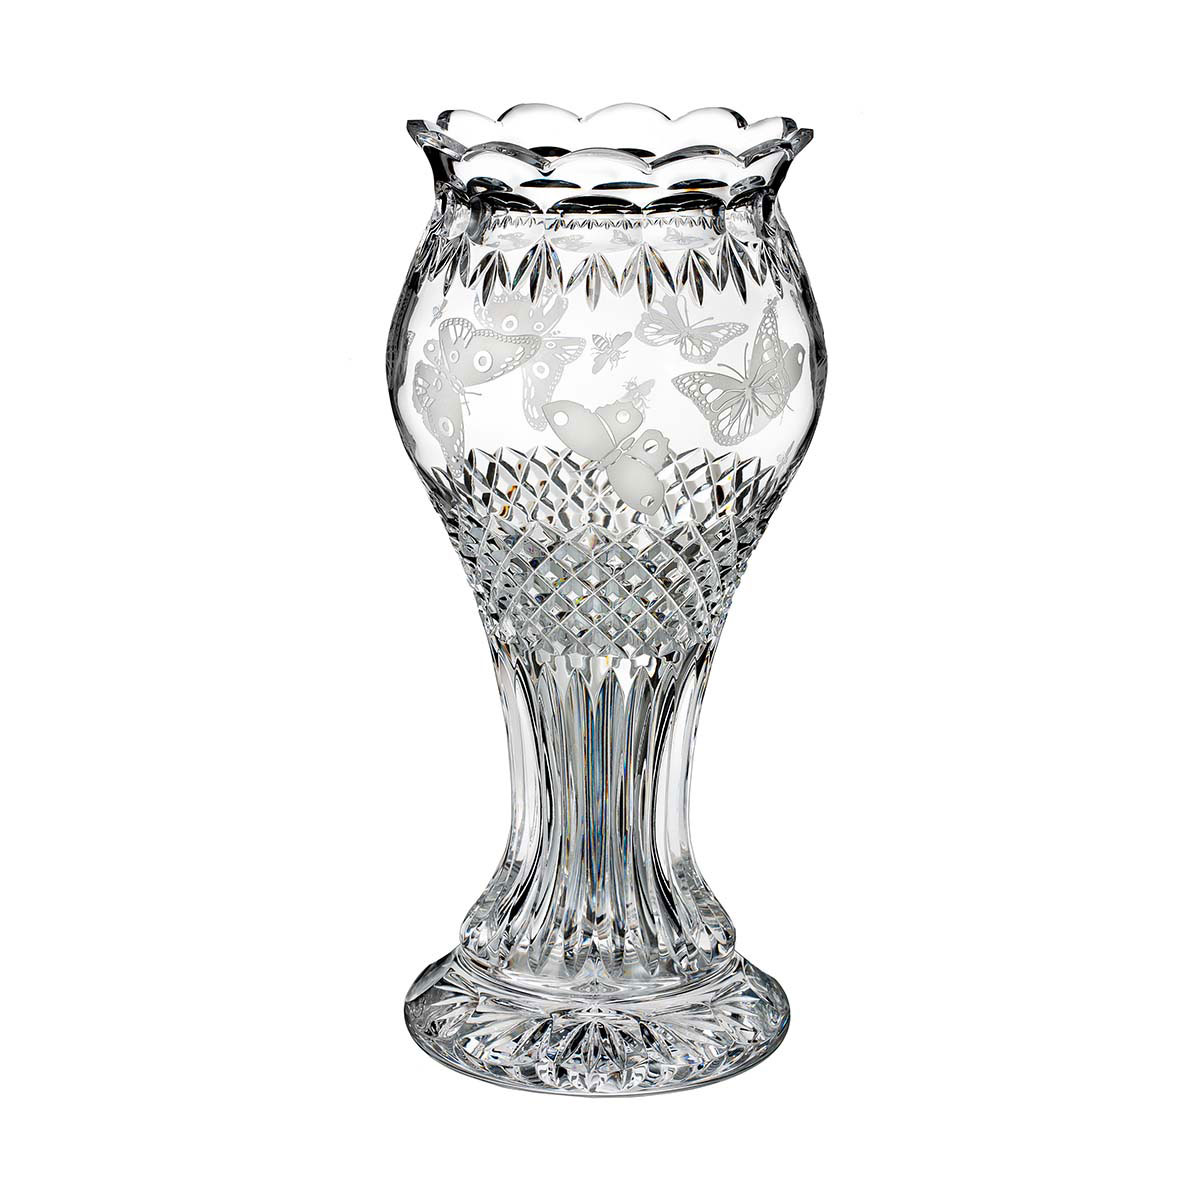 Waterford Crystal, House of Waterford Martin Ryan Butter Bee 14" Crystal Vase, Limited Edition of 400